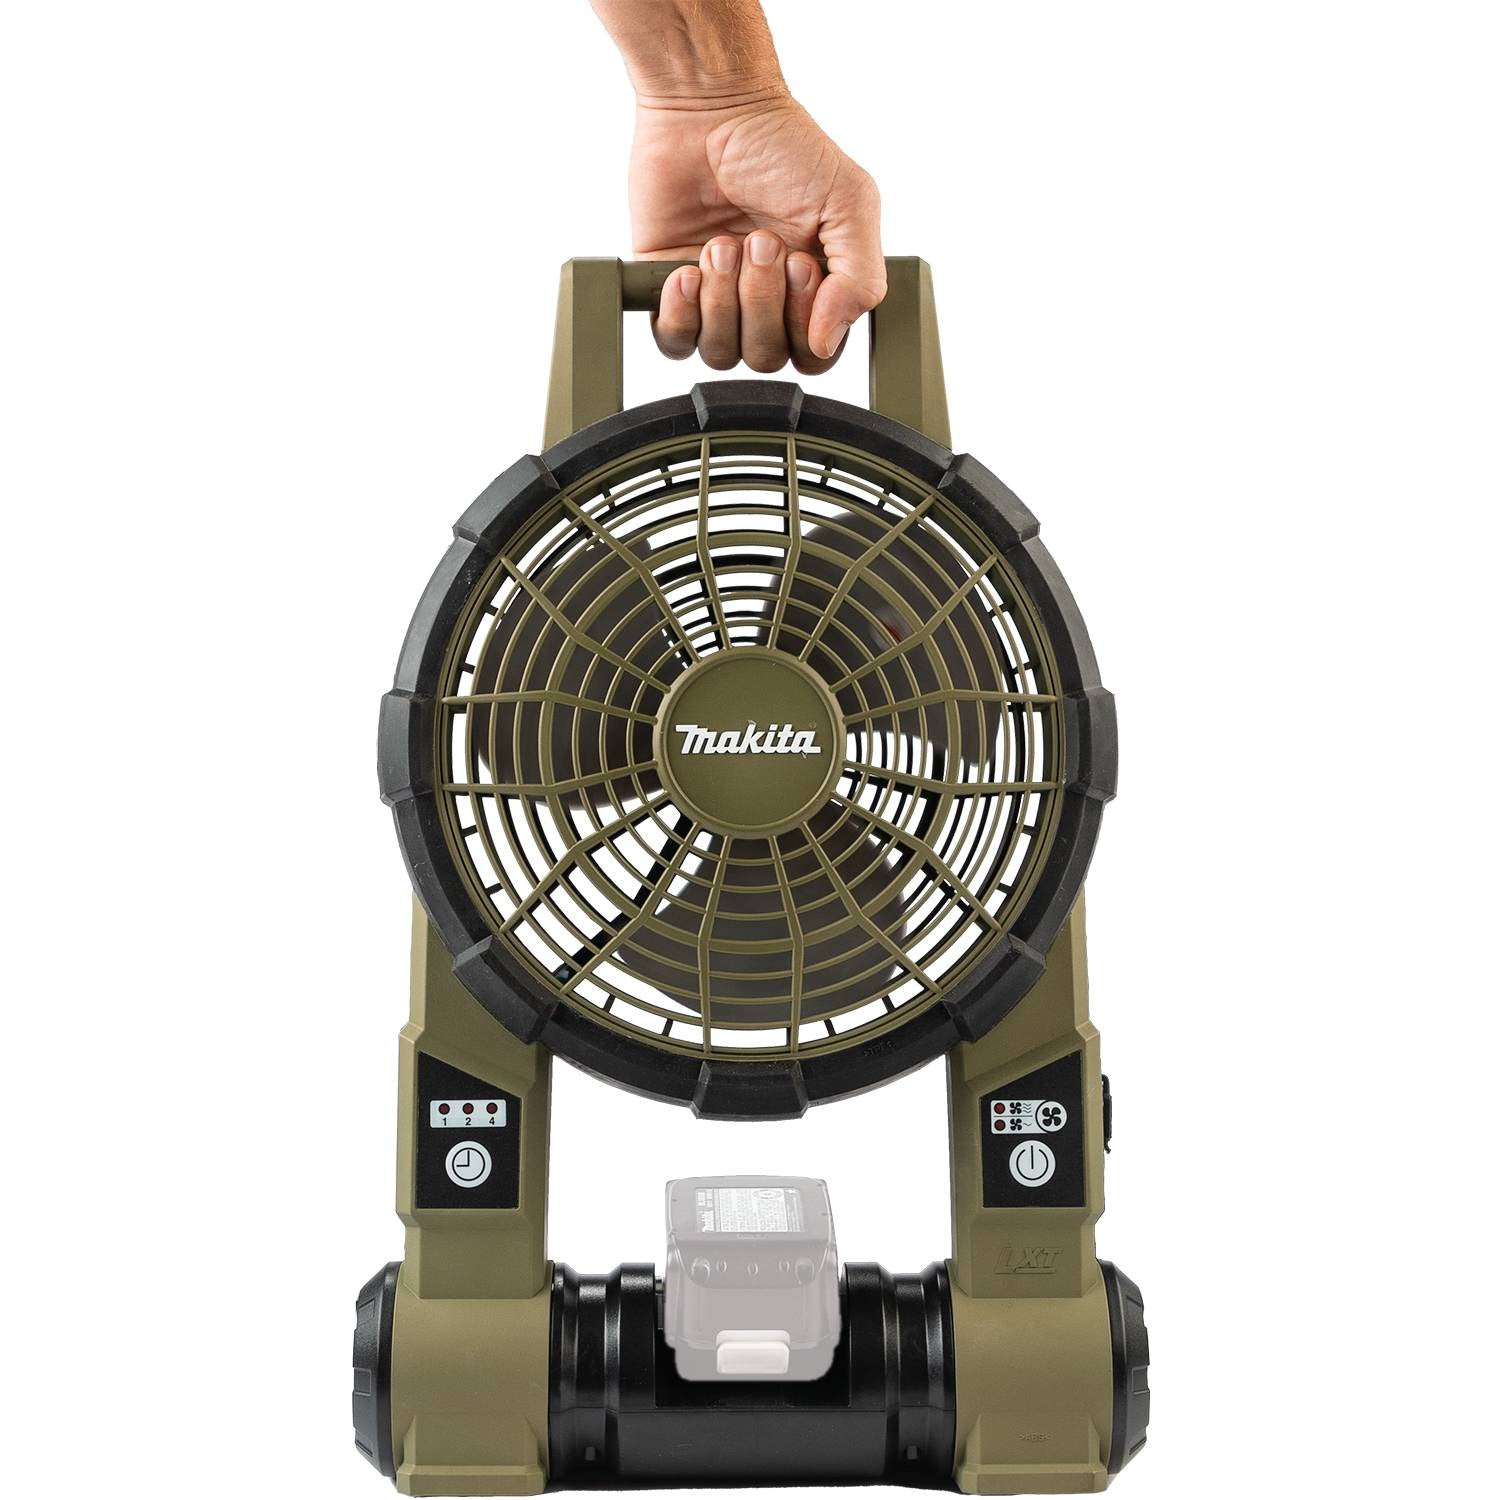 Makita ADCF201Z Outdoor Adventure 18V LXT Lithium-Ion Cordless 9" Fan (Tool Only)